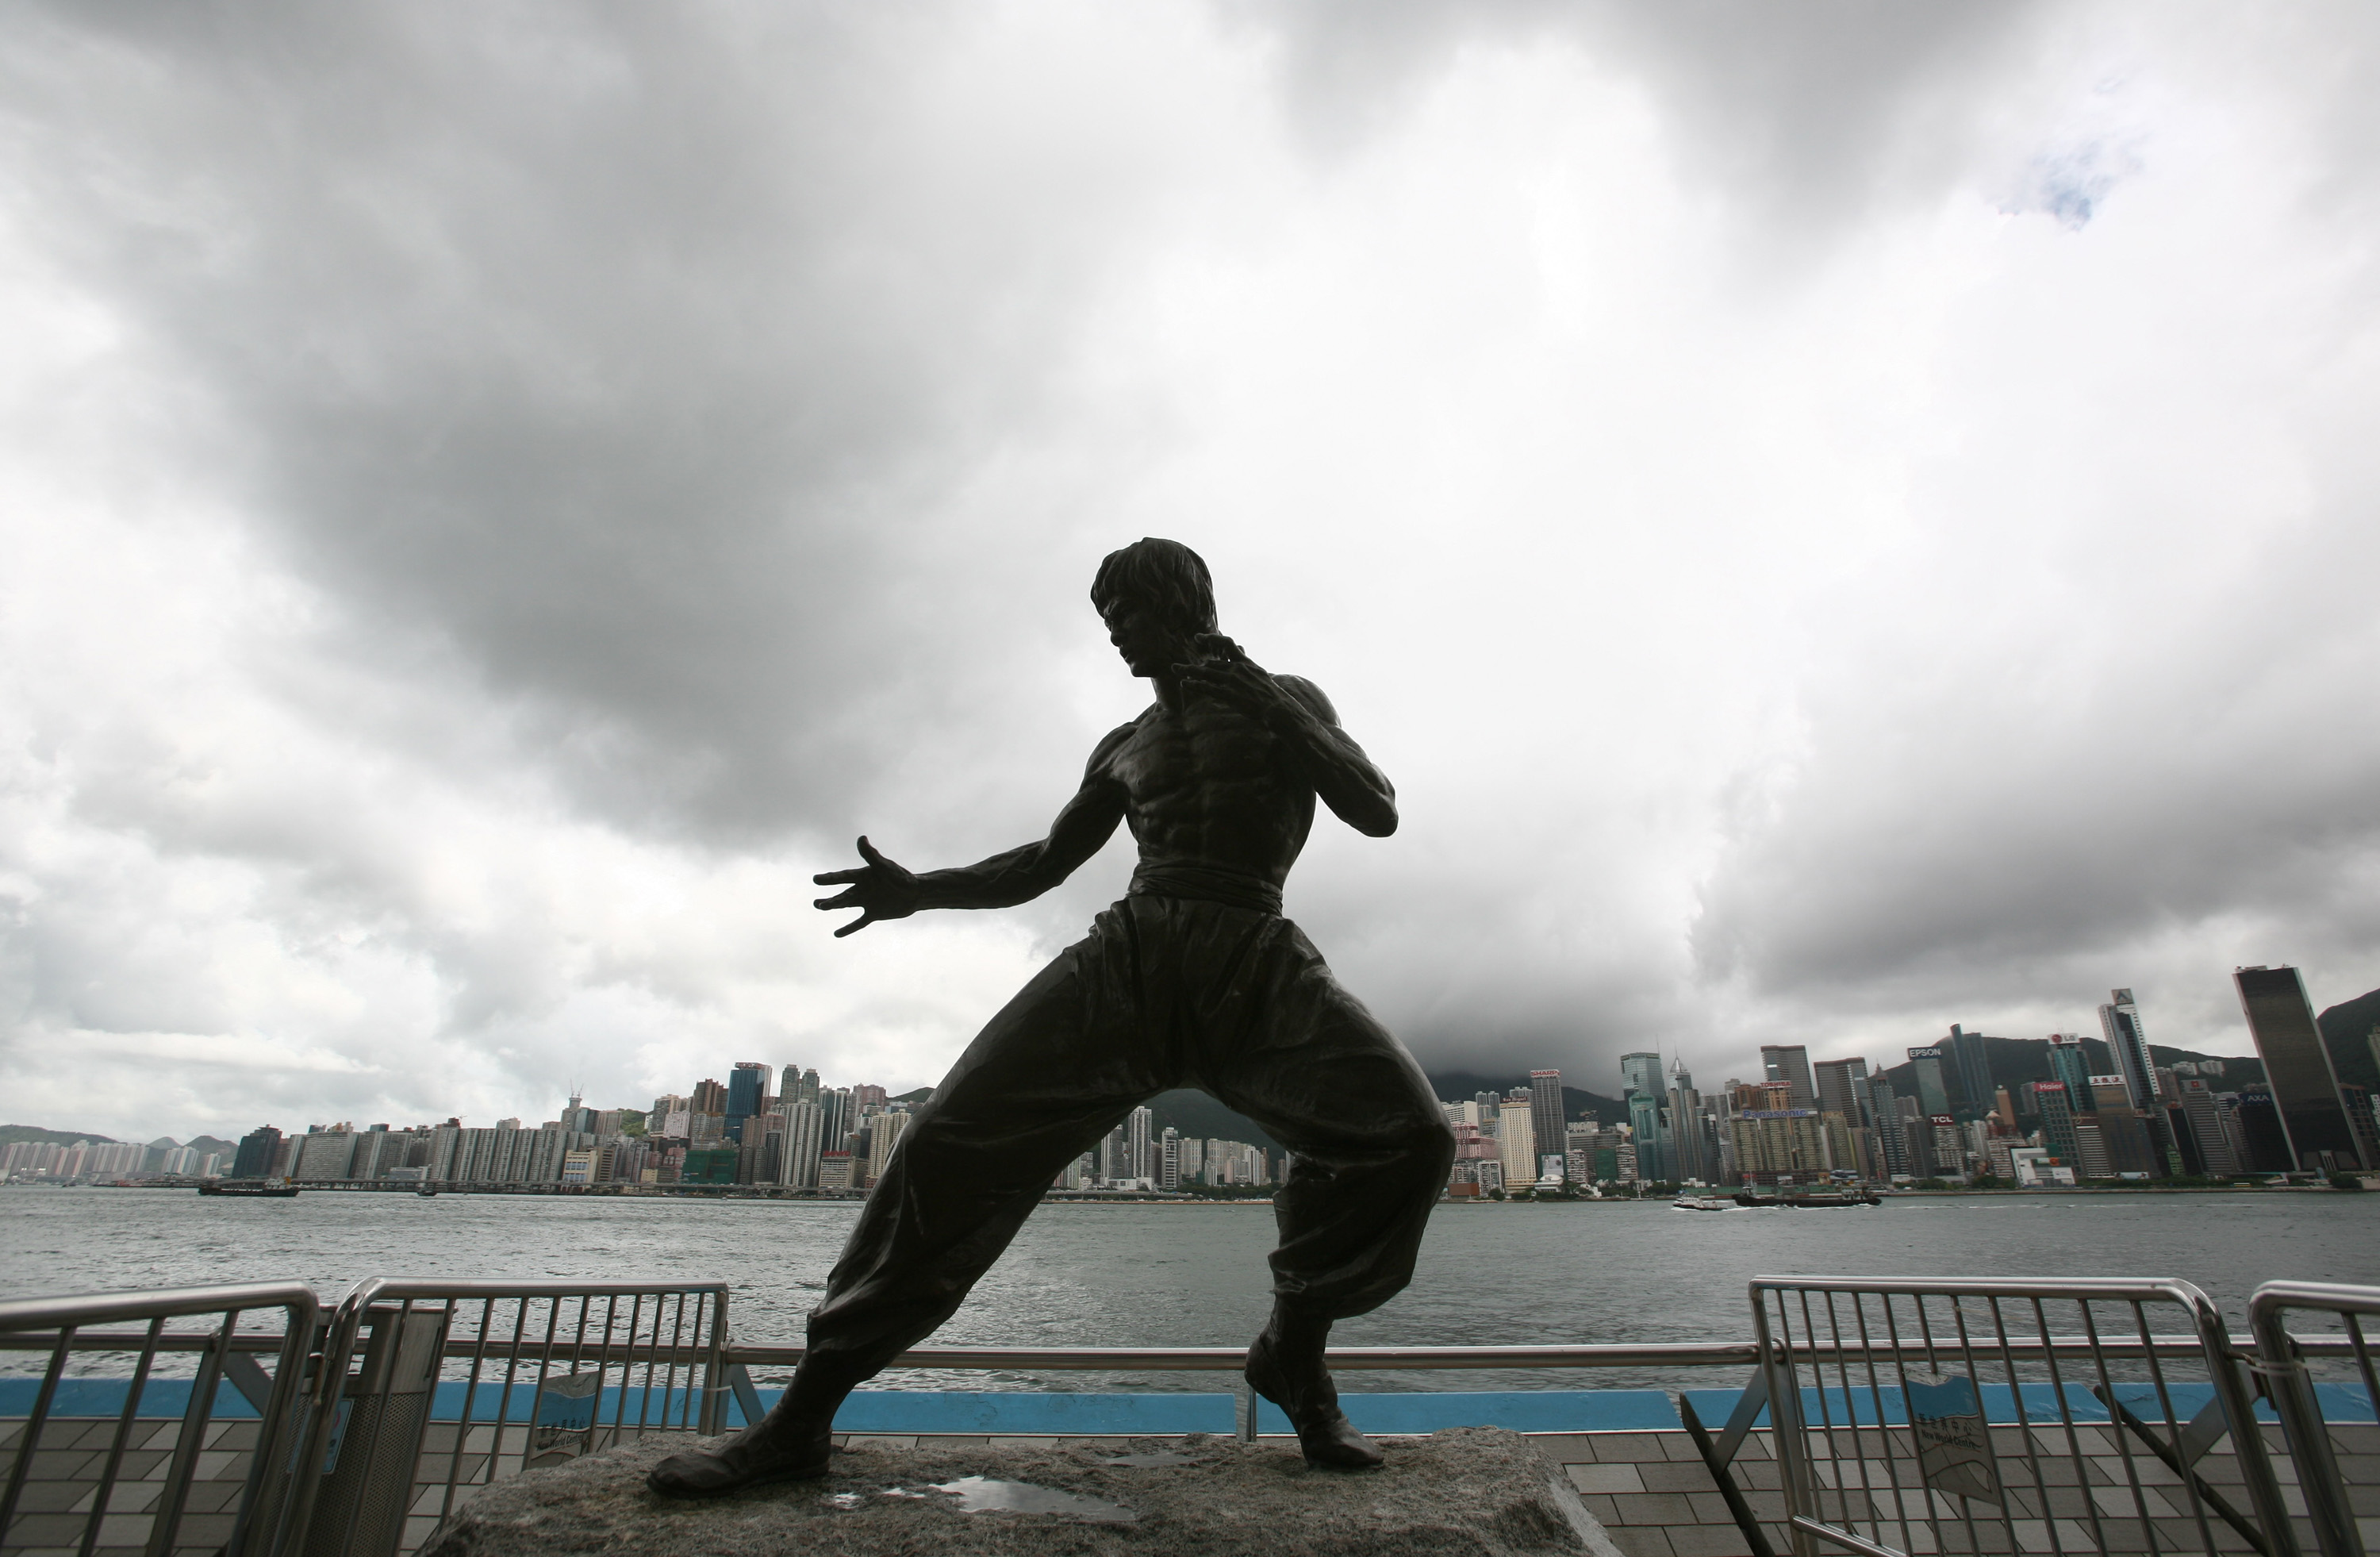 The bronze statue of late martial-arts legend and actor Bruce Lee stands on the Avenue of Stars in Hong Kong, on June 29, 2007. (China Photos/Getty Images)